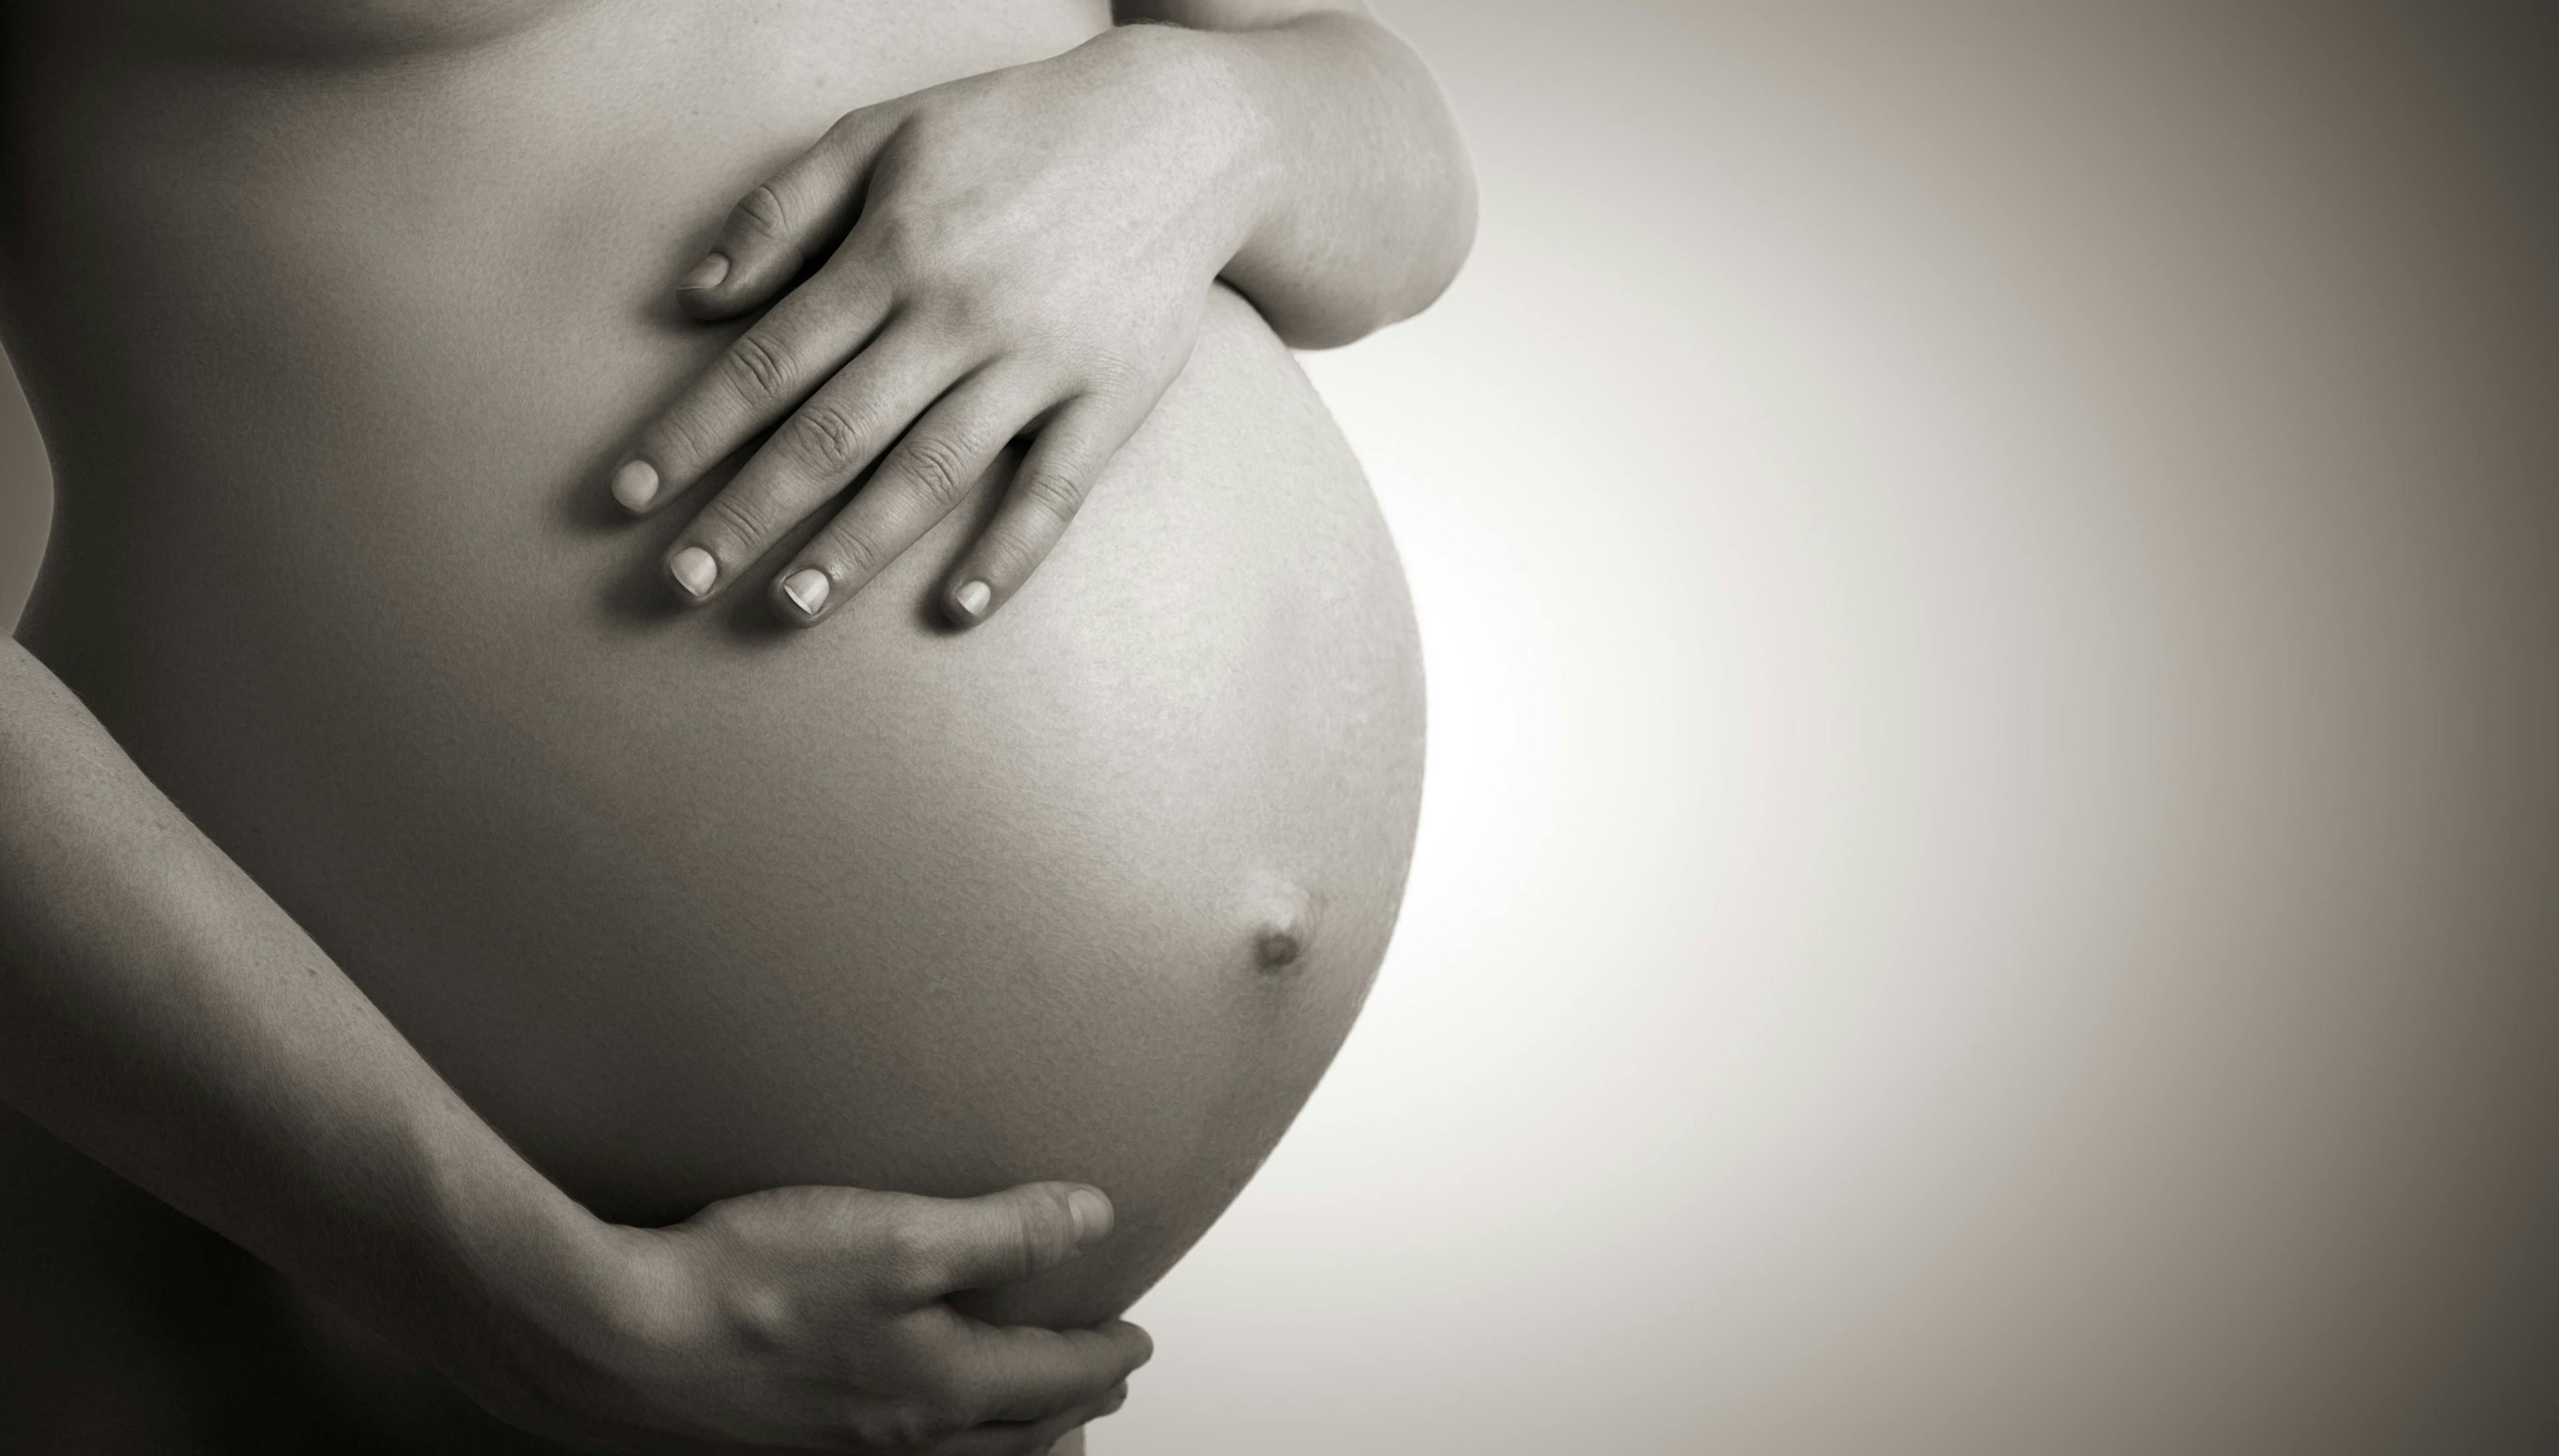 Pregnant Individuals With HIV Have a Higher Risk of Hypertensive Disorders if They Have a Weak Immune System